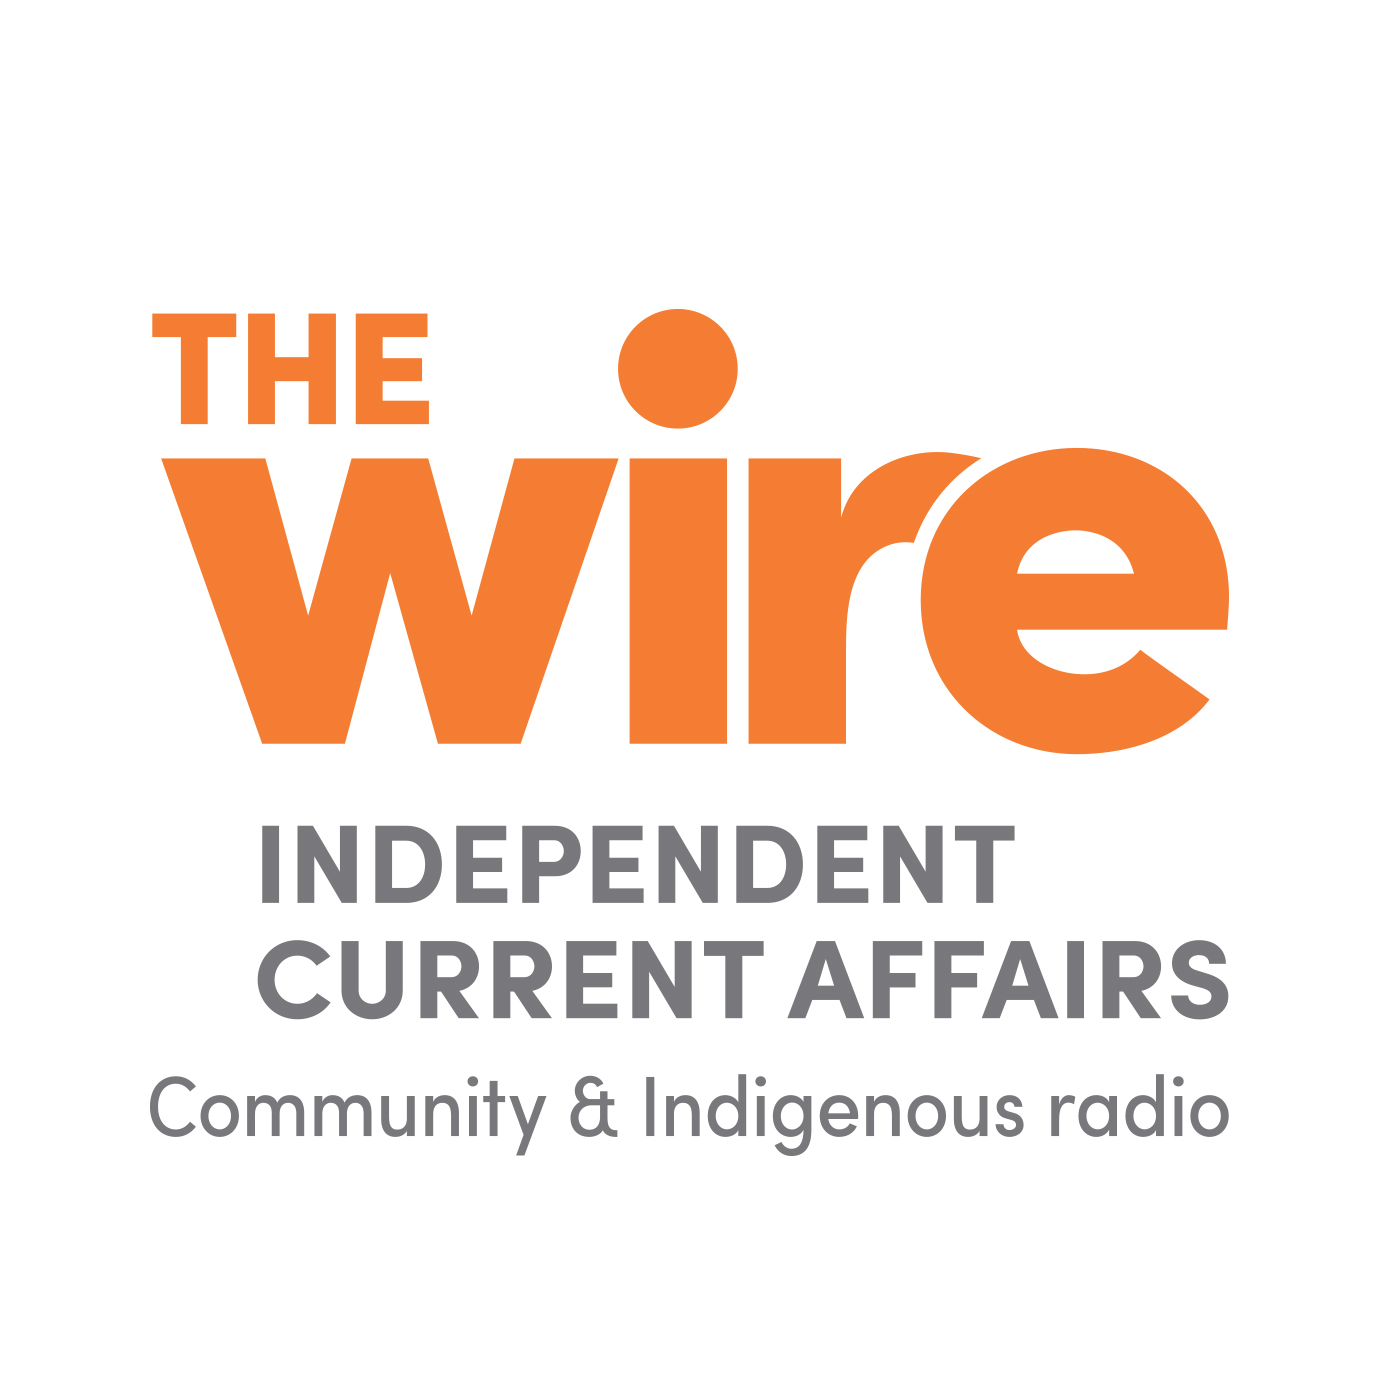 The Wire logo